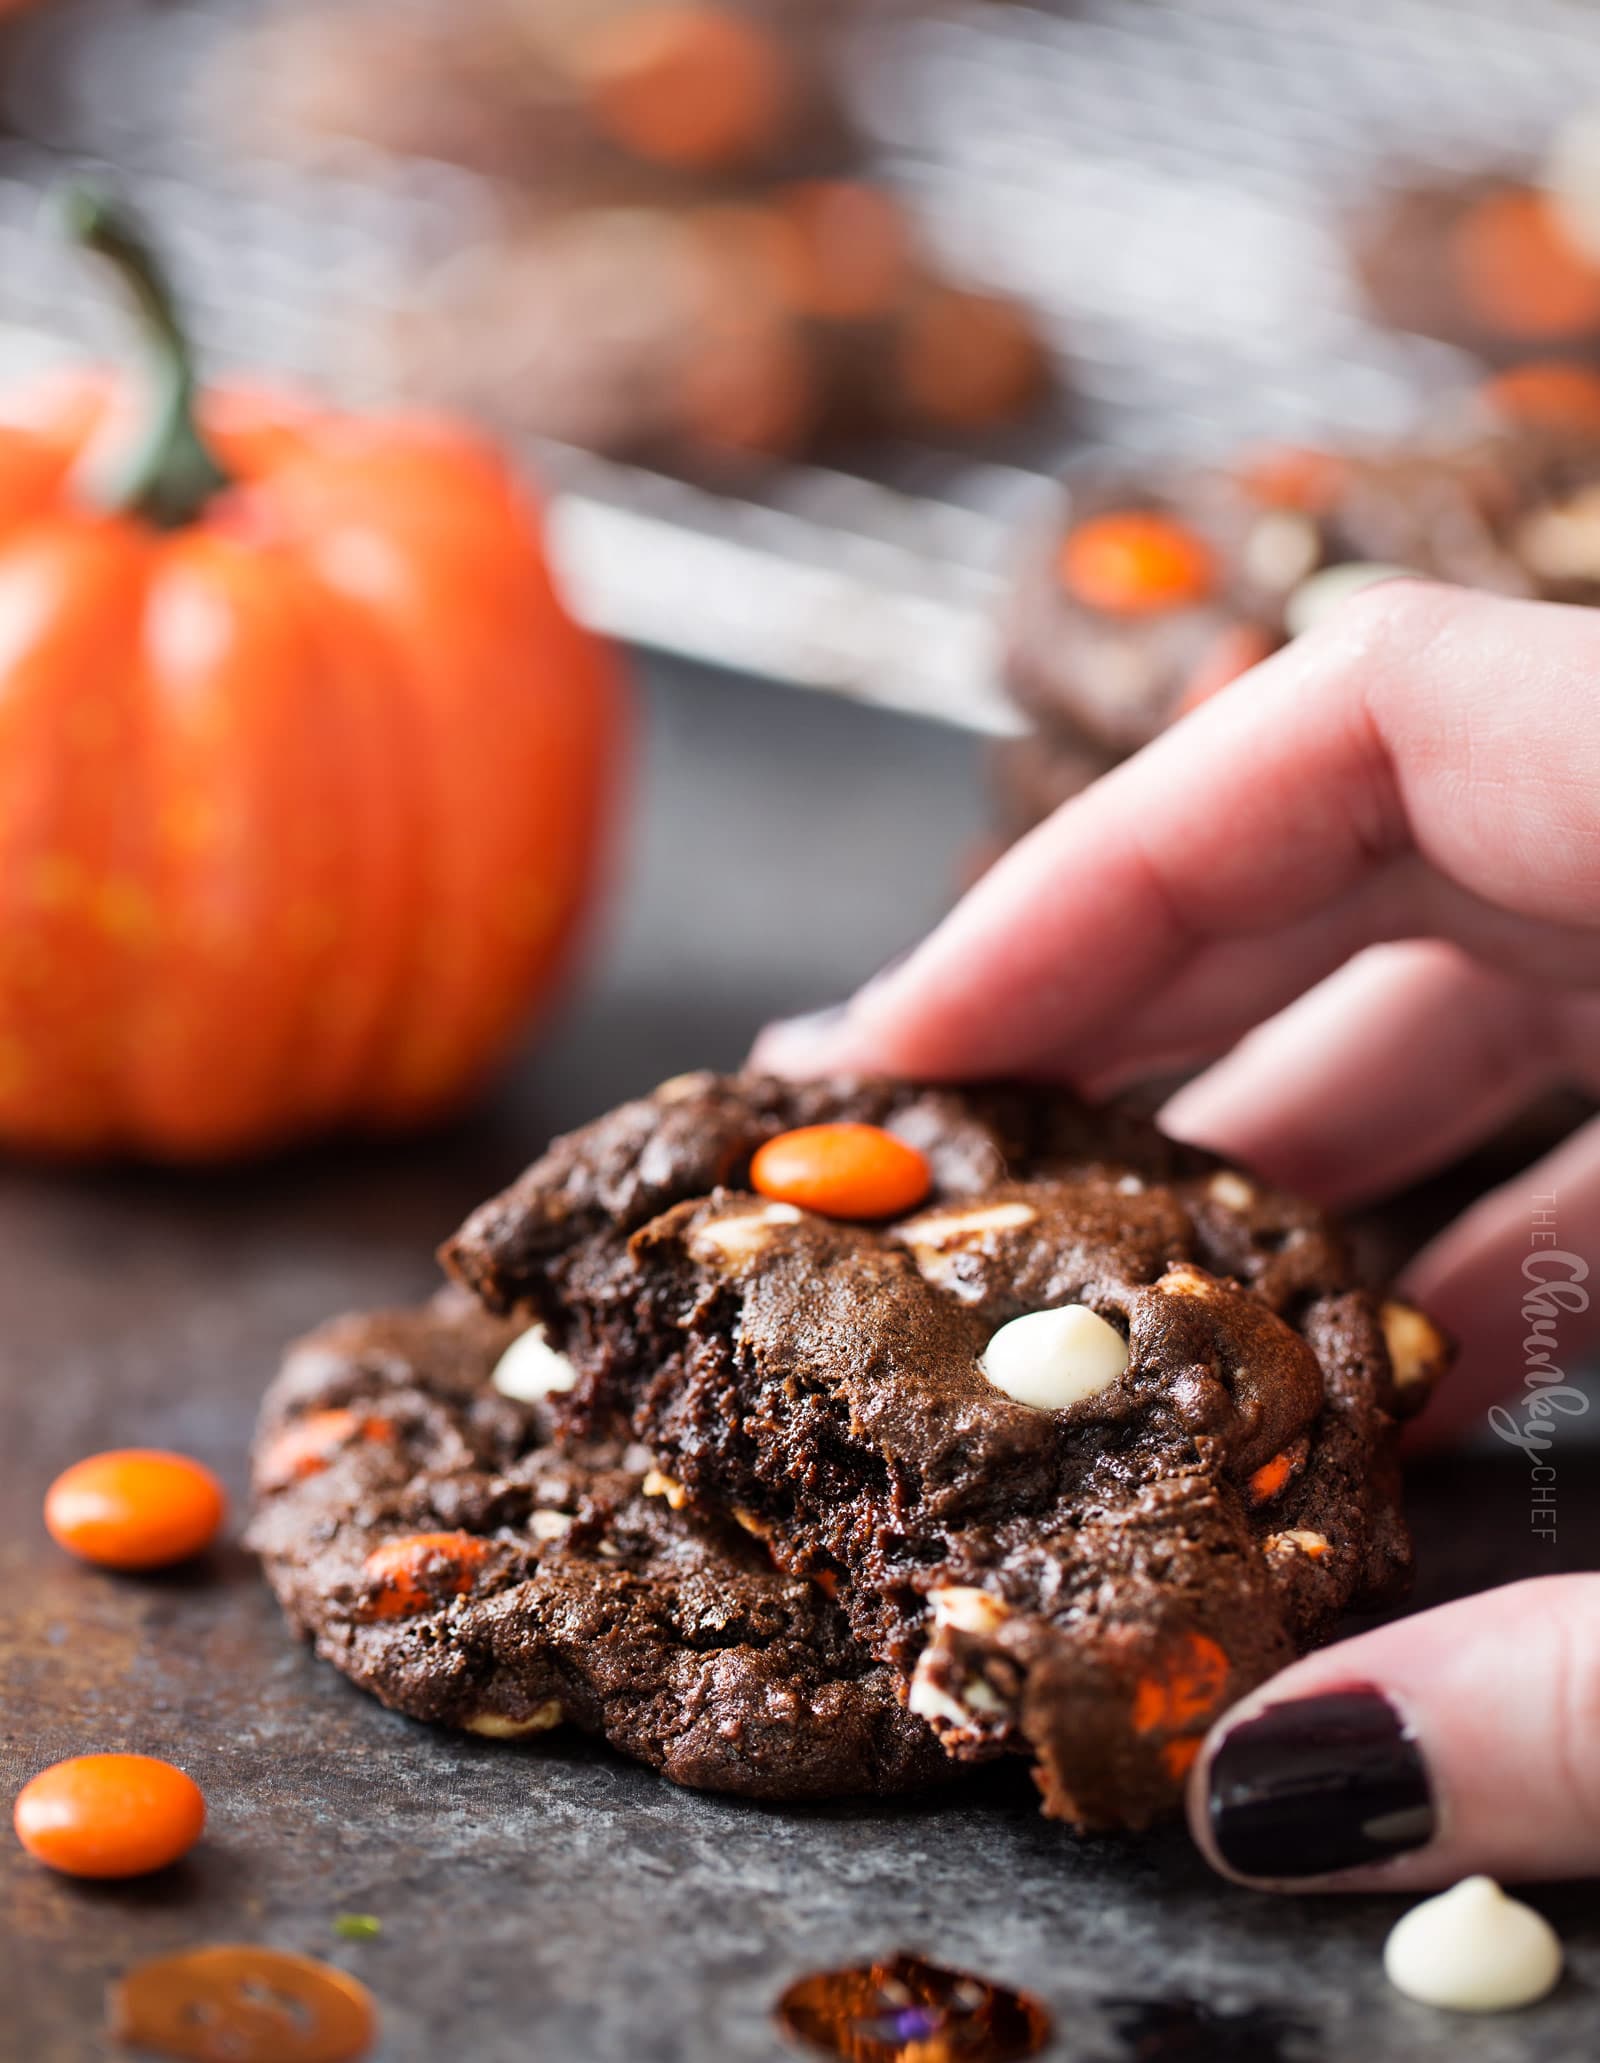 Peanut Butter Candy Double Chocolate Cookies | Fudgy and chewy double chocolate cookies, studded with white chocolate chips and Reese's pieces candies, which give them a fun Halloween look! | https://www.thechunkychef.com | #cookies #holiday #chocolate #baking